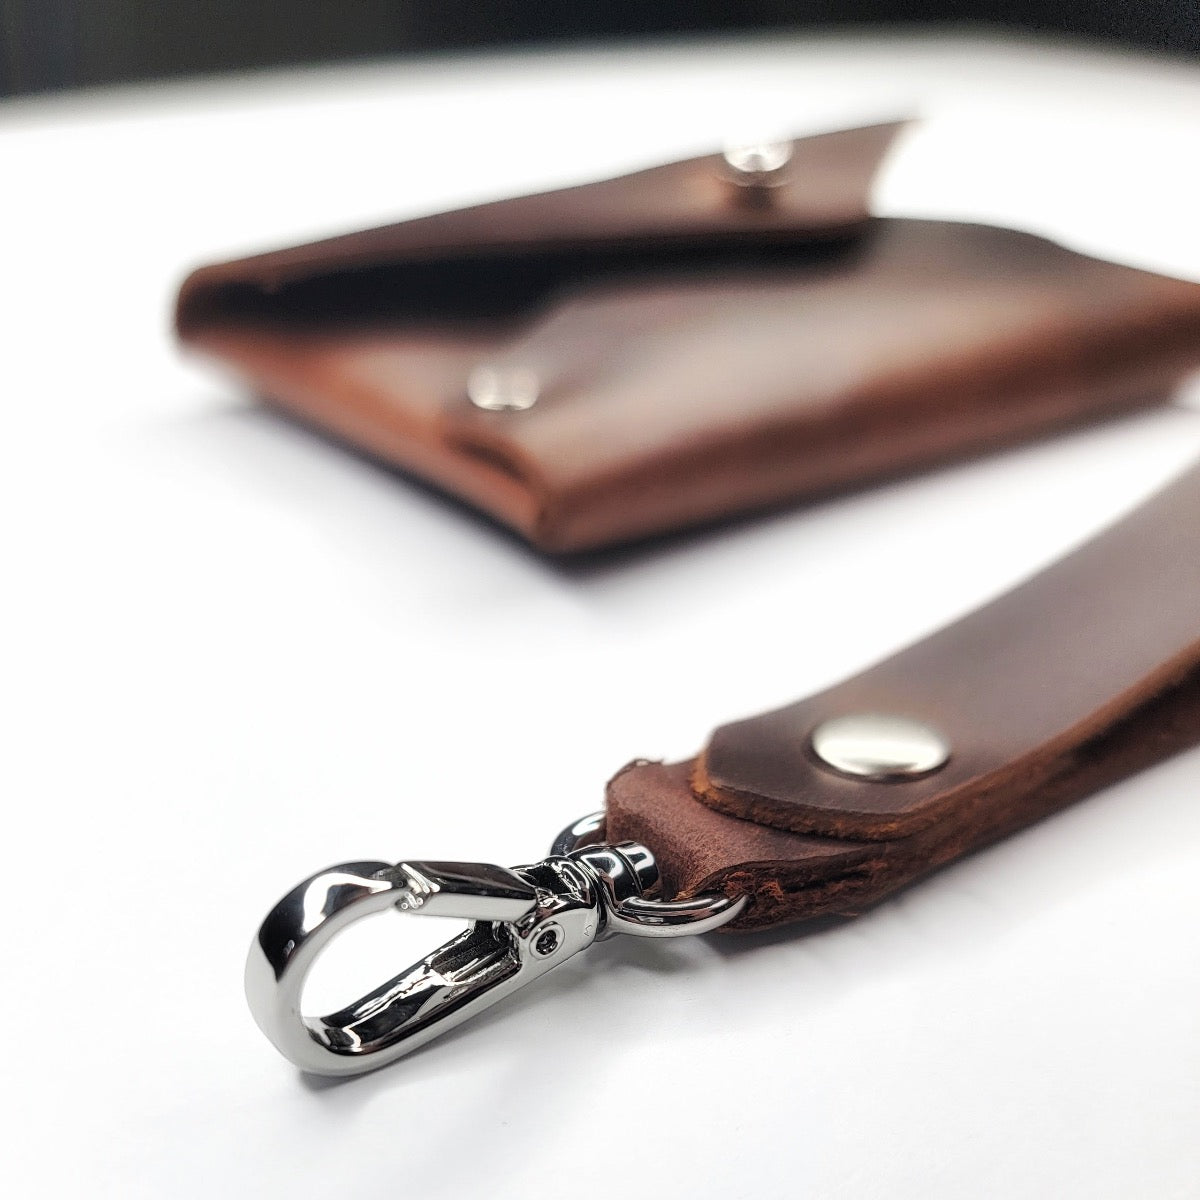 Handmade brown leather wristlet wallet with chrome Sam Browne button with cash compartment by Echo Six Designs